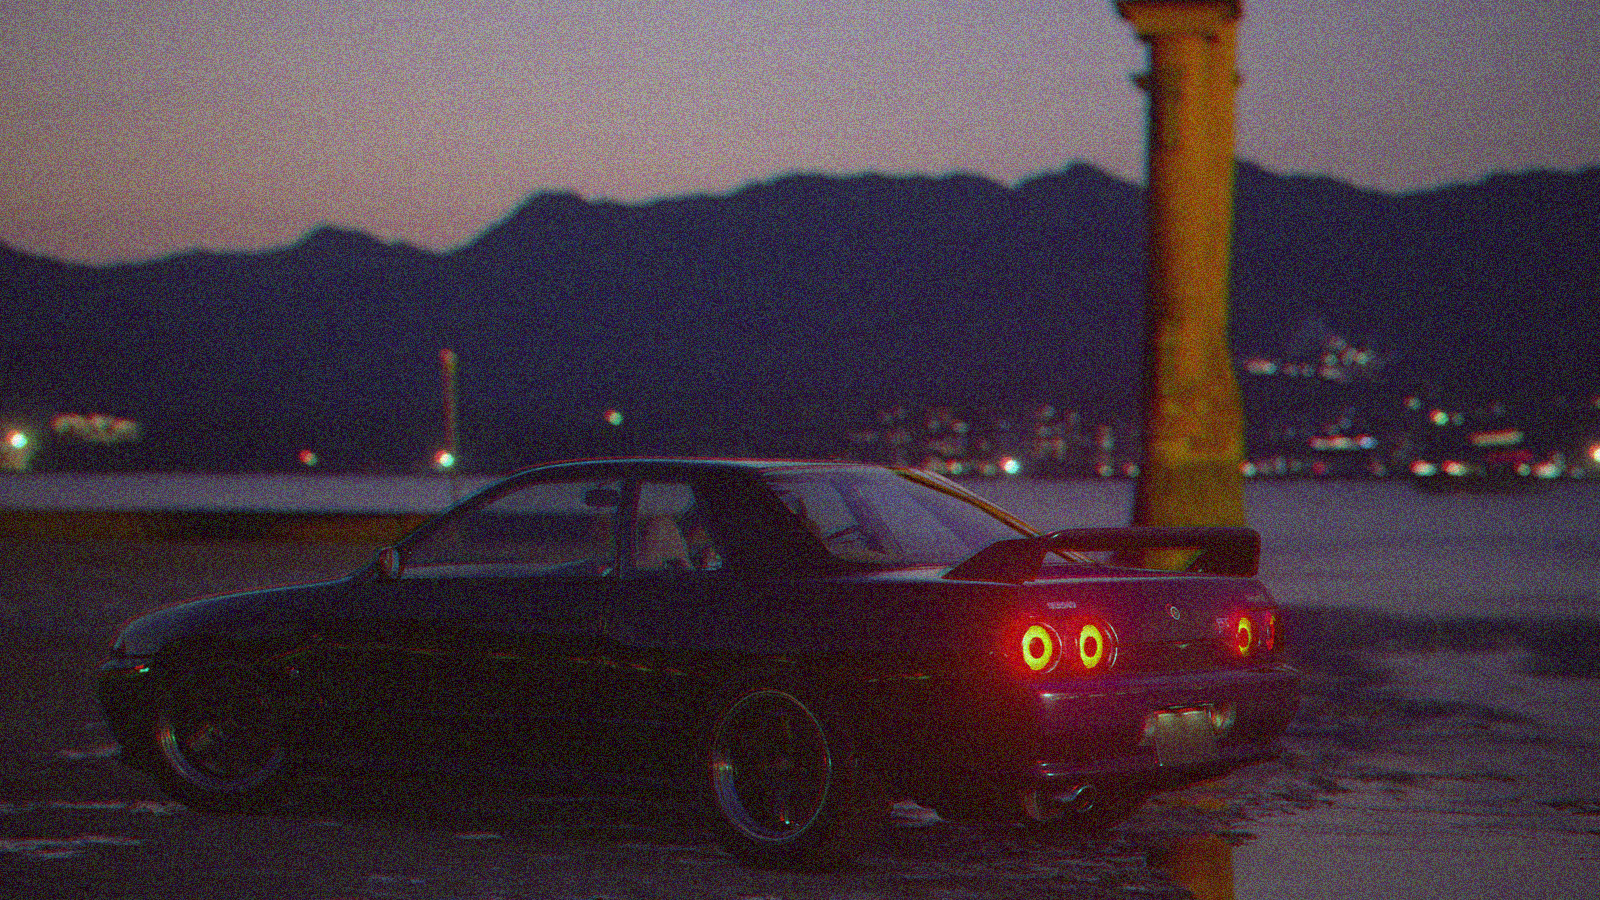 Outstanding Jdm Wallpaper Aesthetic Pc You Can Save It Without A